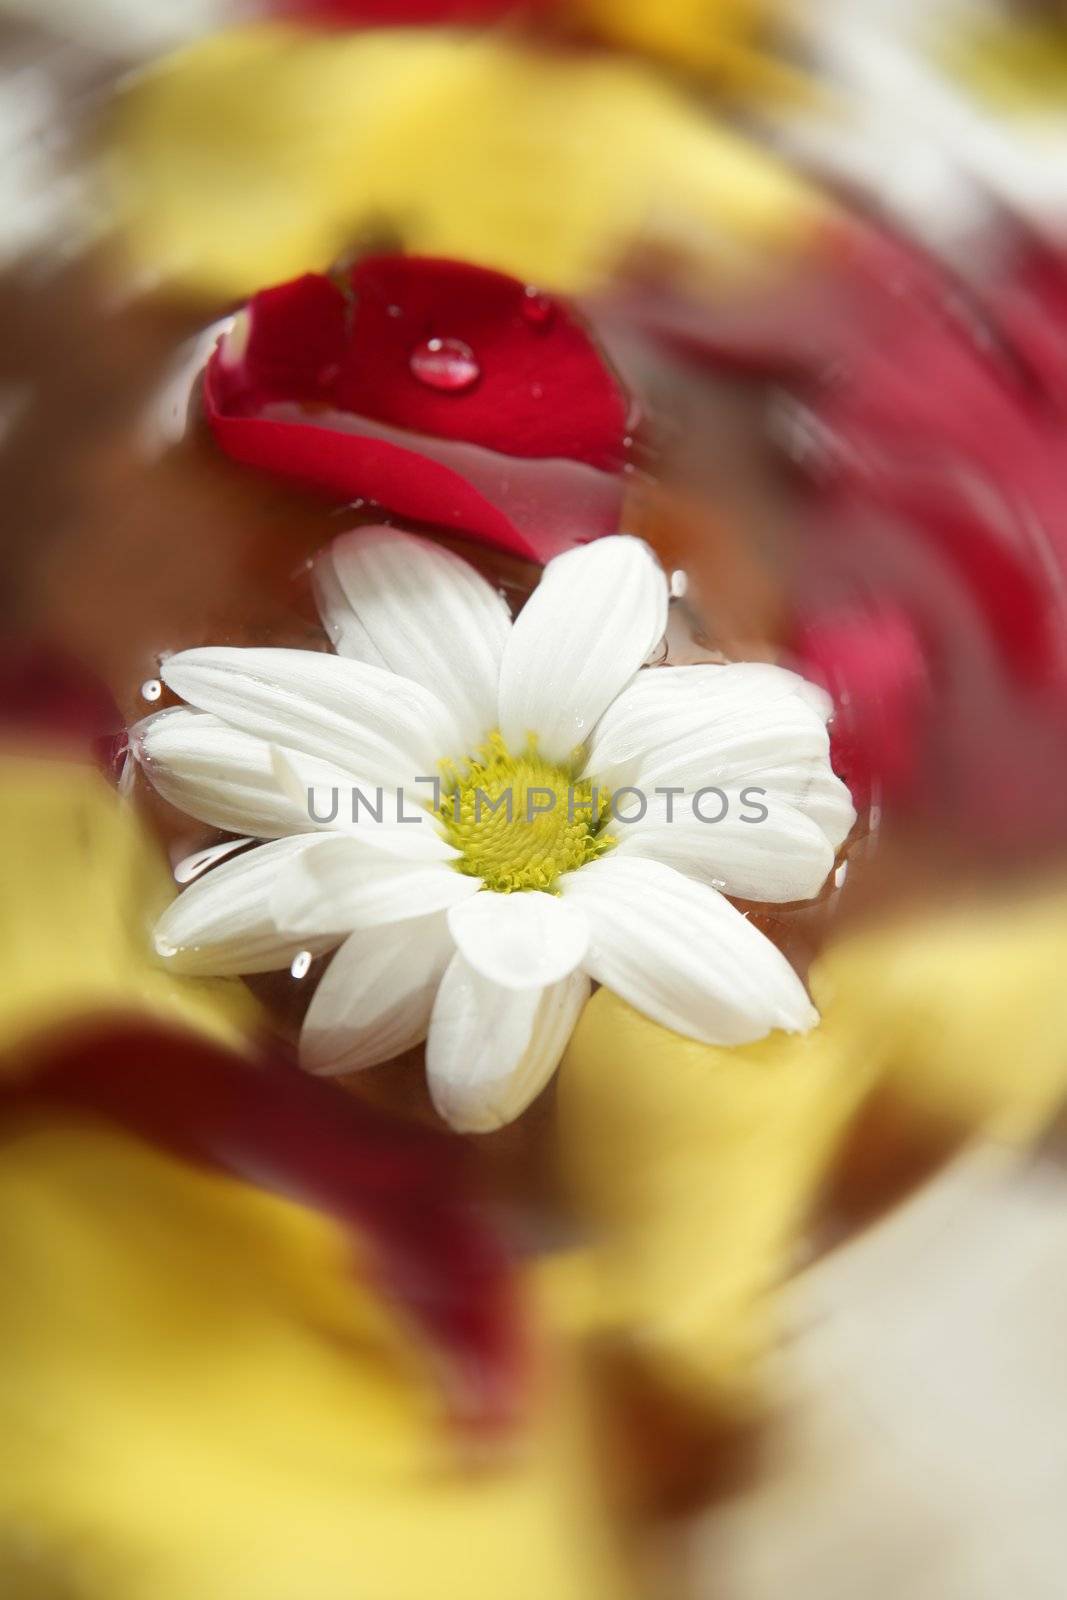 Rose petals and daisy flower on water spa aromatherapy bath